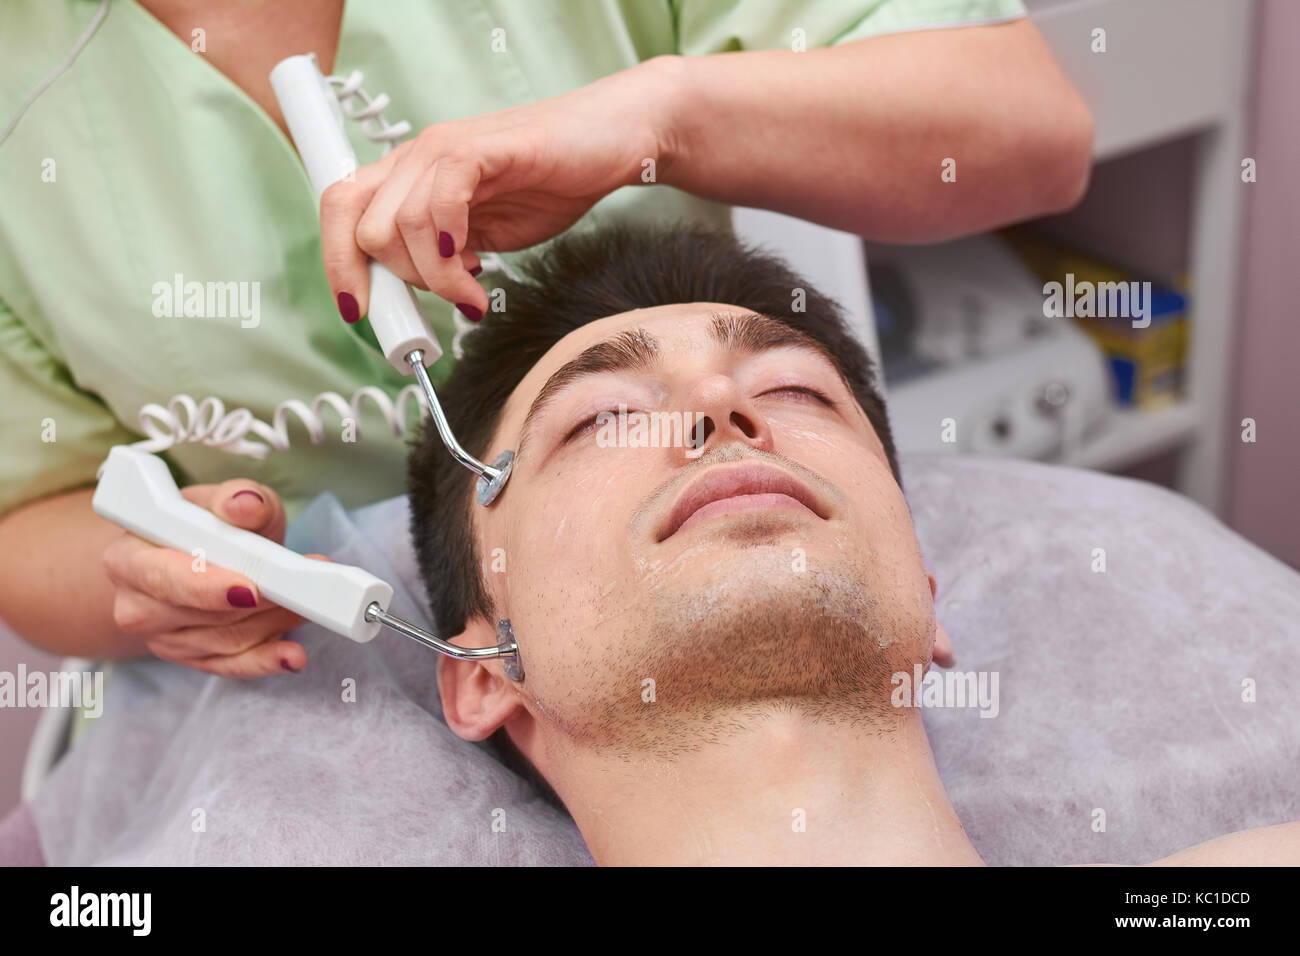 Face of man, microcurrent therapy. Stock Photo